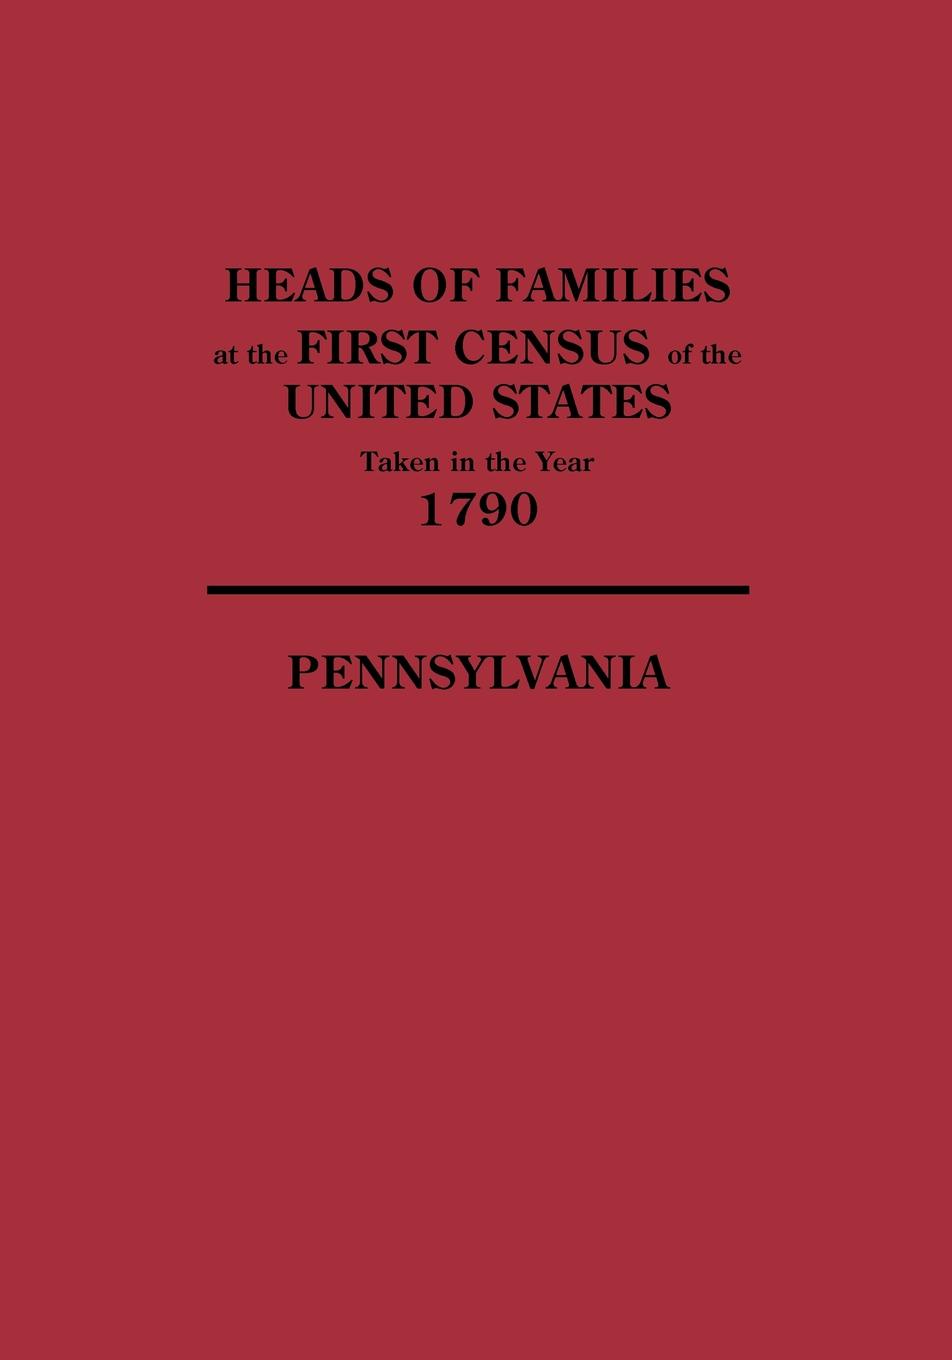 Heads of Families at the First Census of the United States Taken in the Year 1790. Pennsylvania